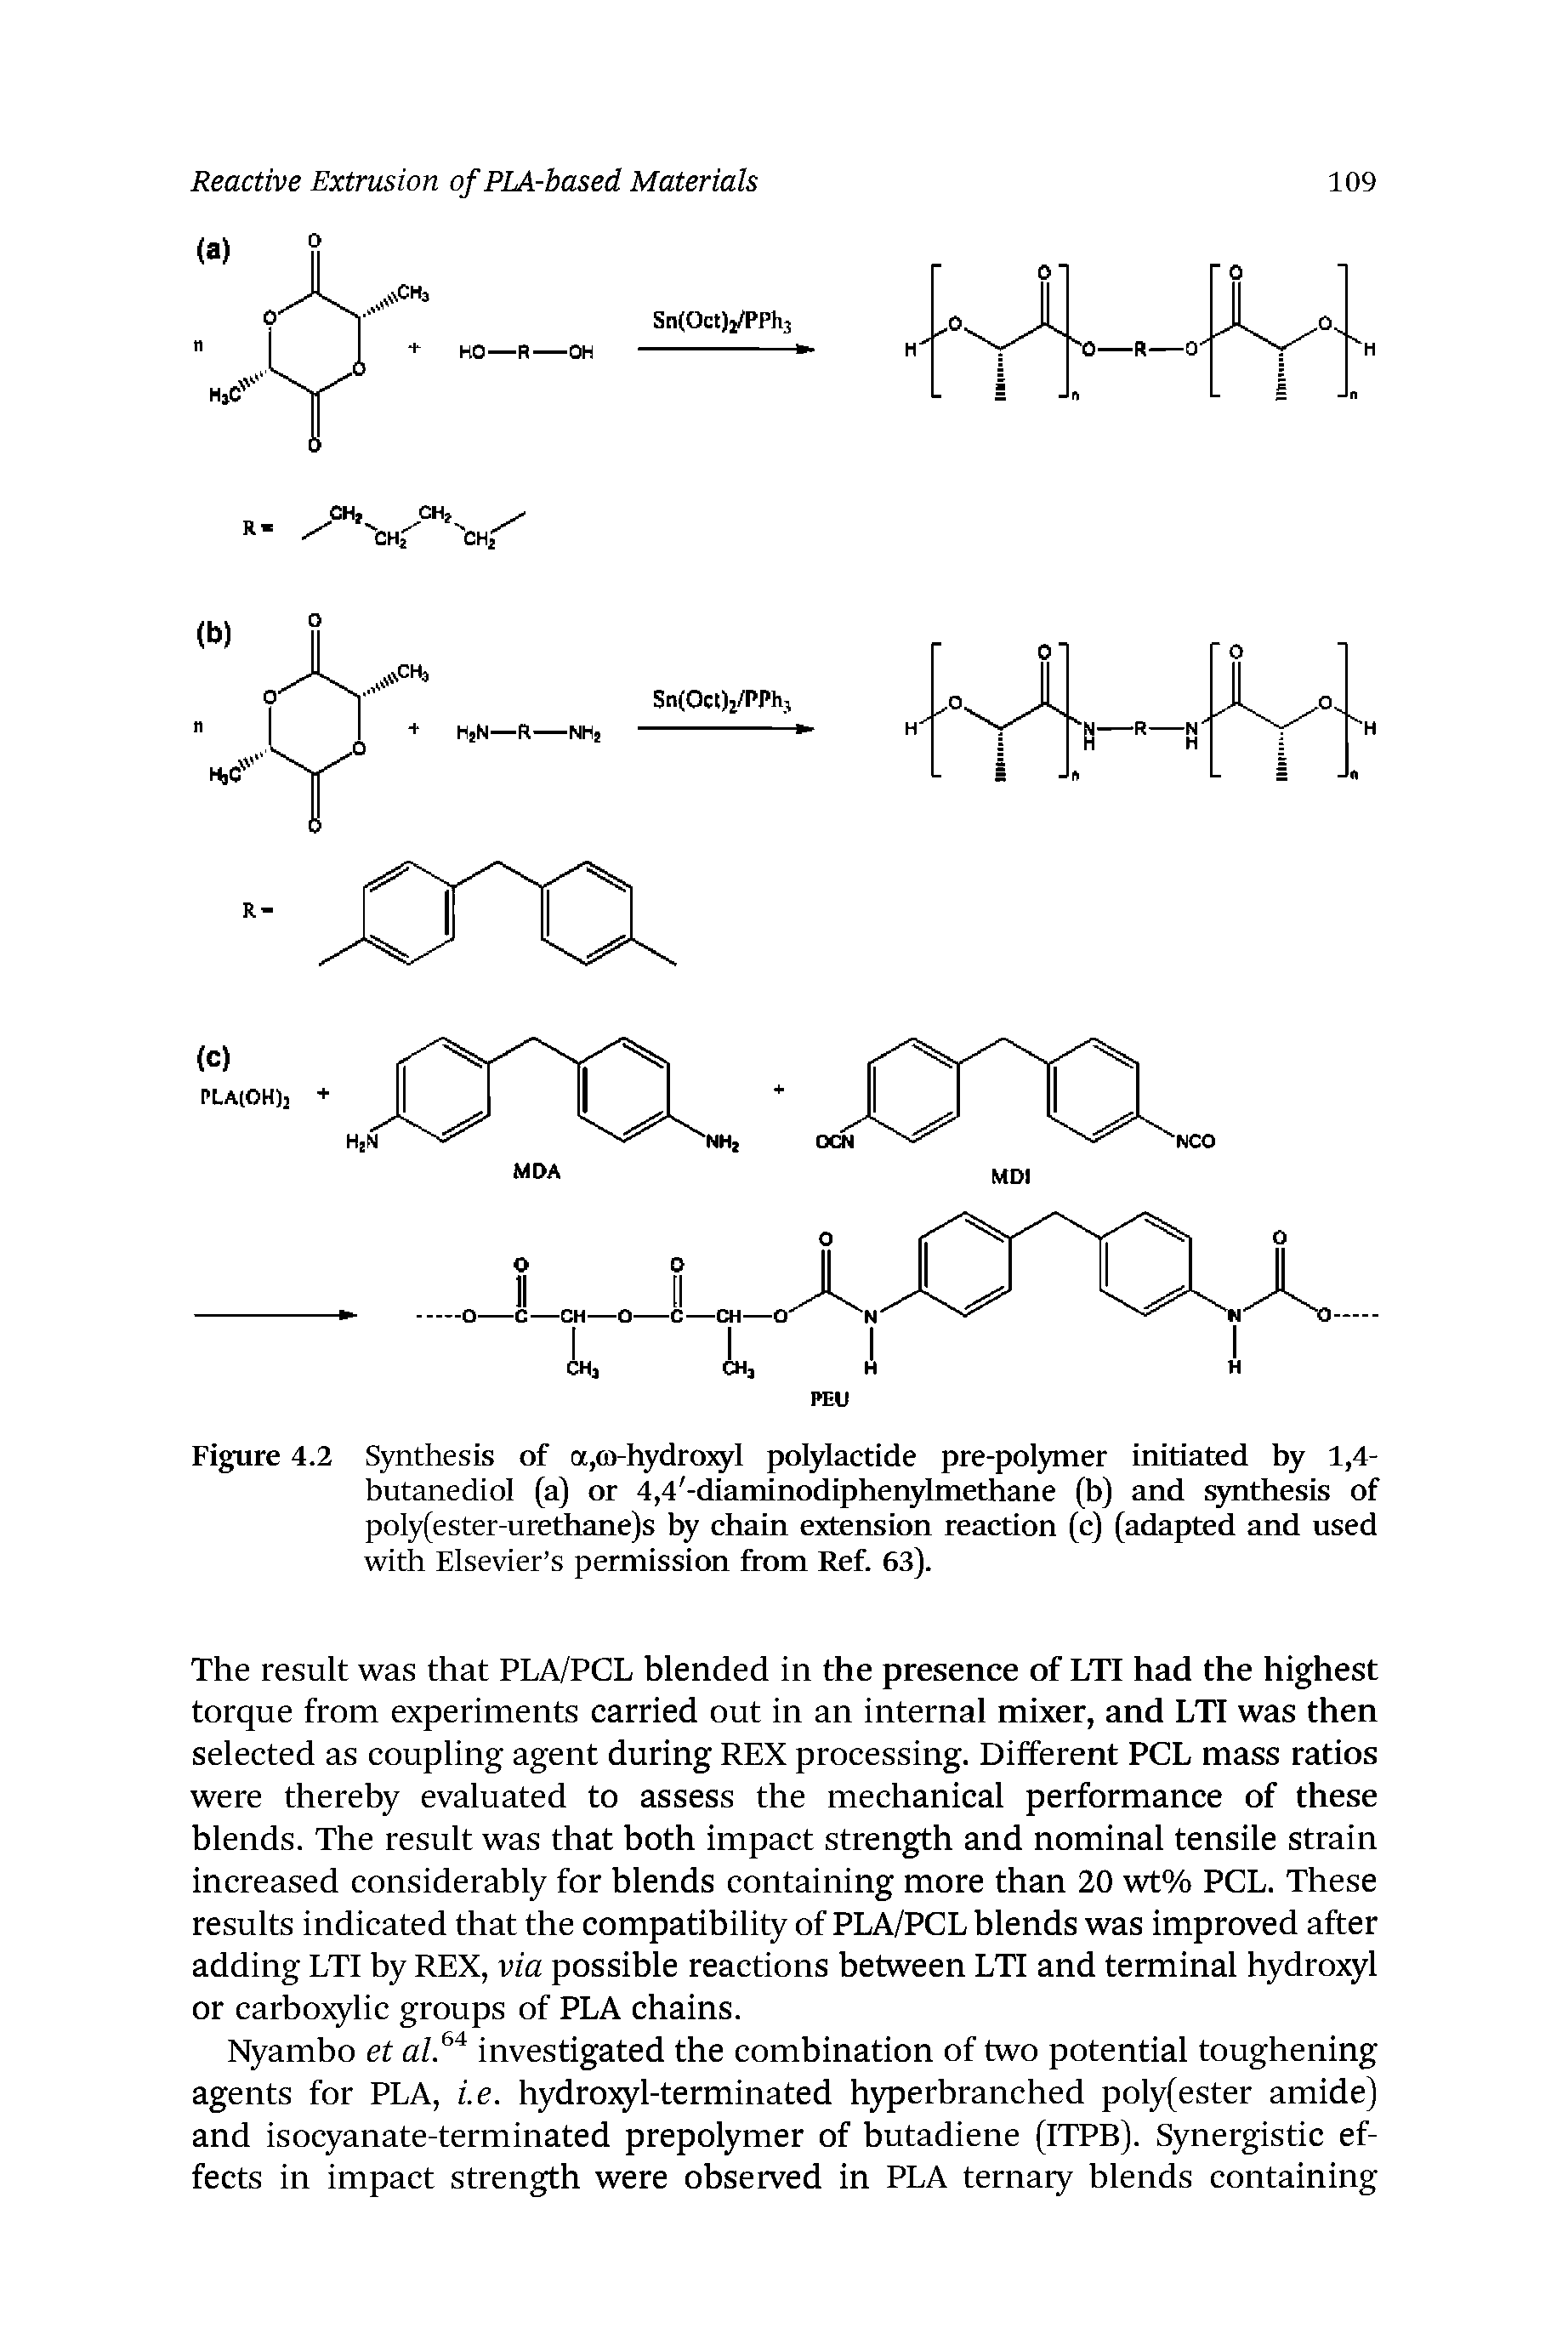 Figure 4.2 Synthesis of a,tB-hydro3g l polylactide pre-pol3Tner initiated by 1,4-butanediol (a) or 4,4 -diaininodiphenylmethane (b) and qmthesis of poly(ester-urethane)s by chain extension reaction (c) (adapted and used...